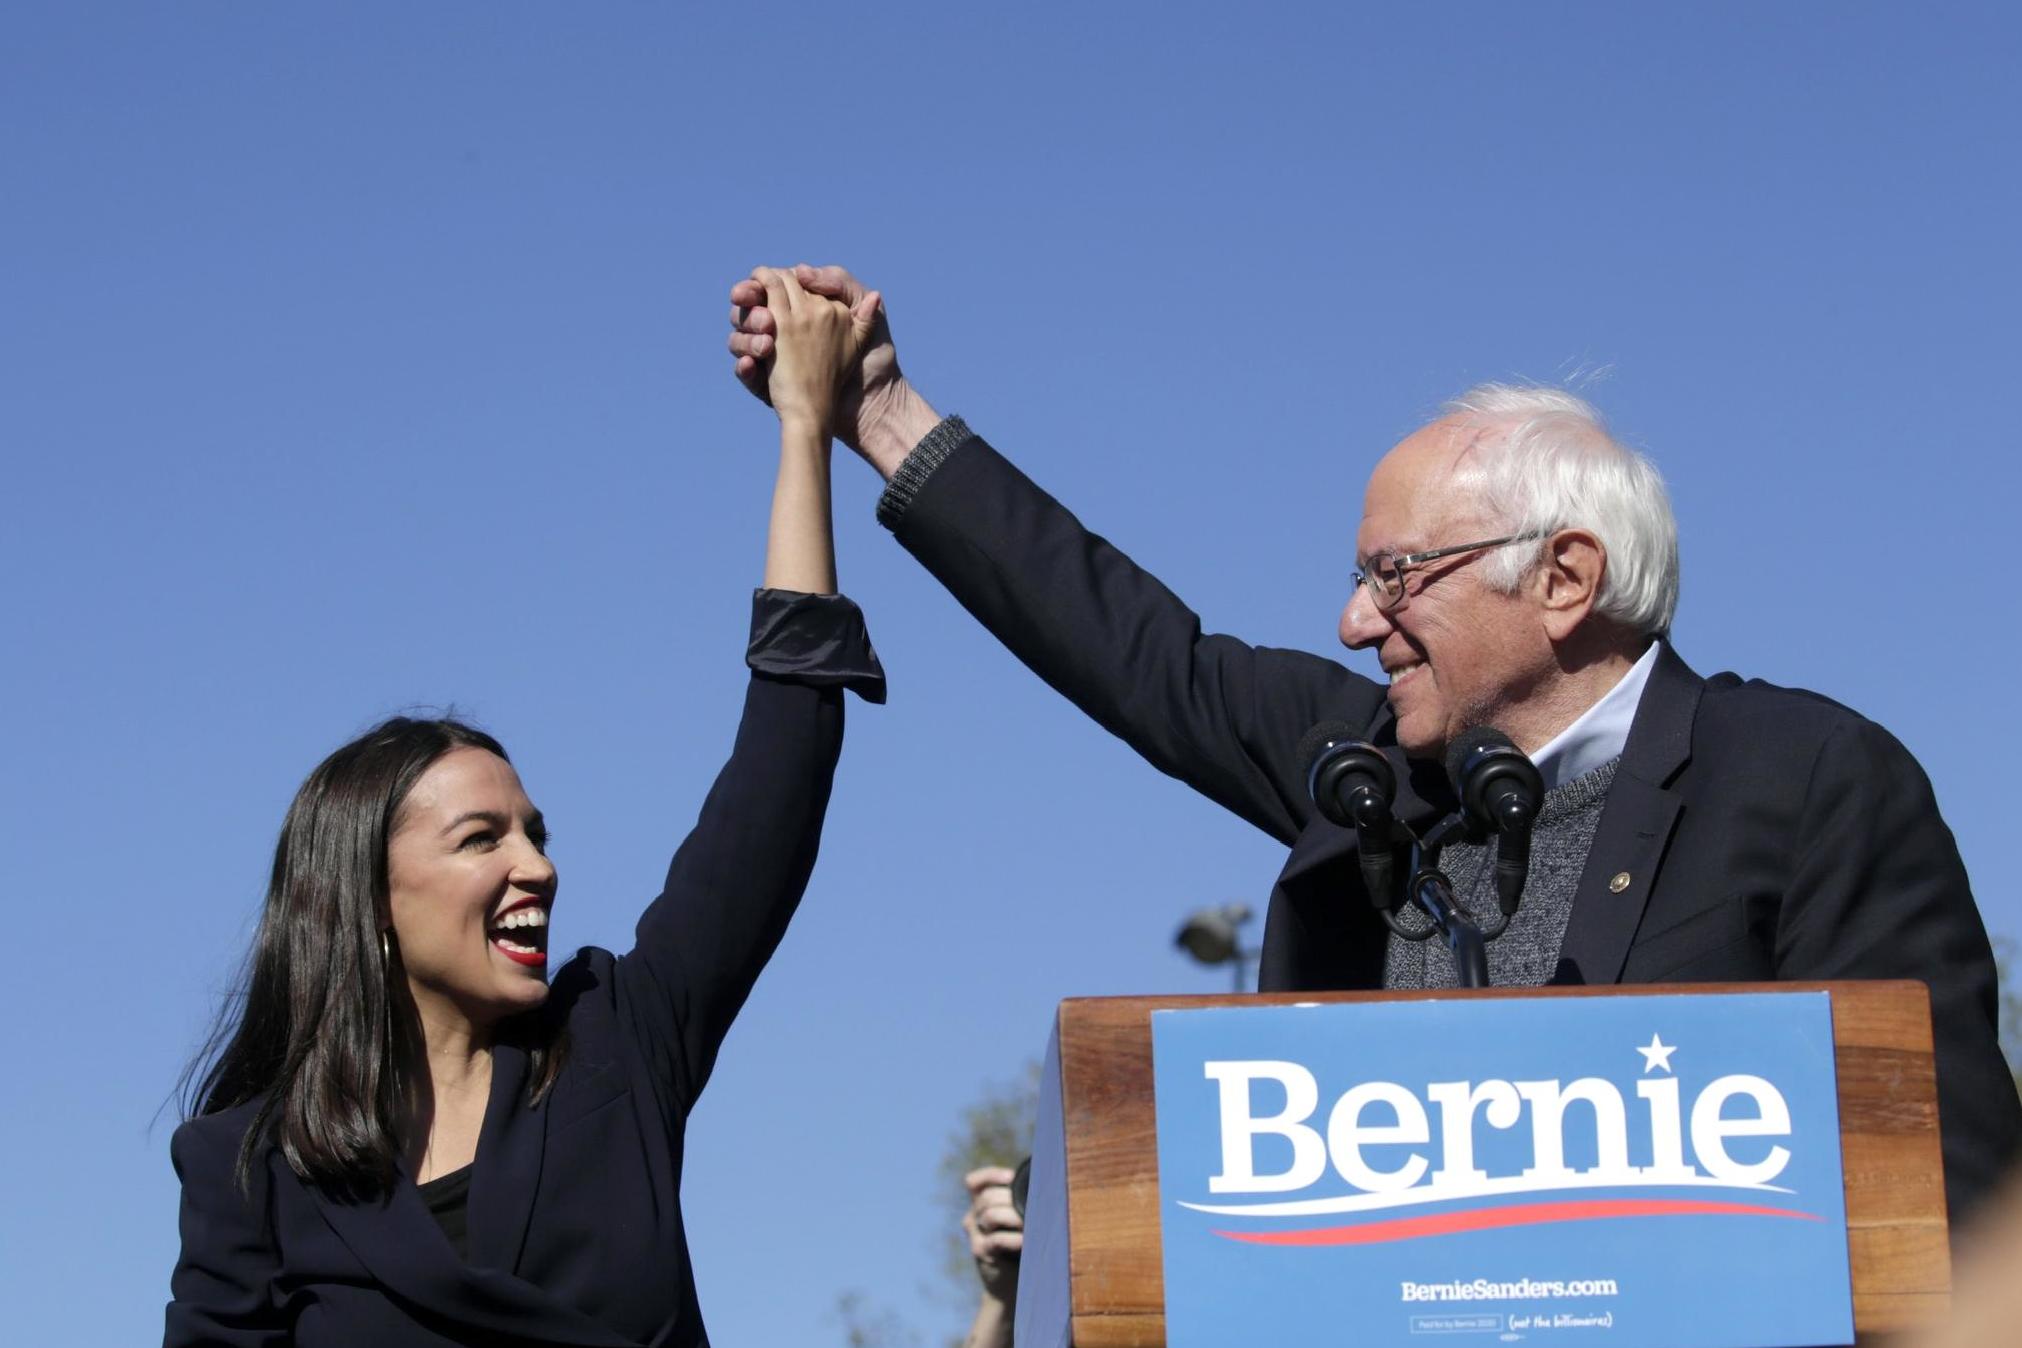 Bernie has been endorsed by a number of young Democratic freshmen including Alexandria Ocasio-Cortez and Ilhan Omar